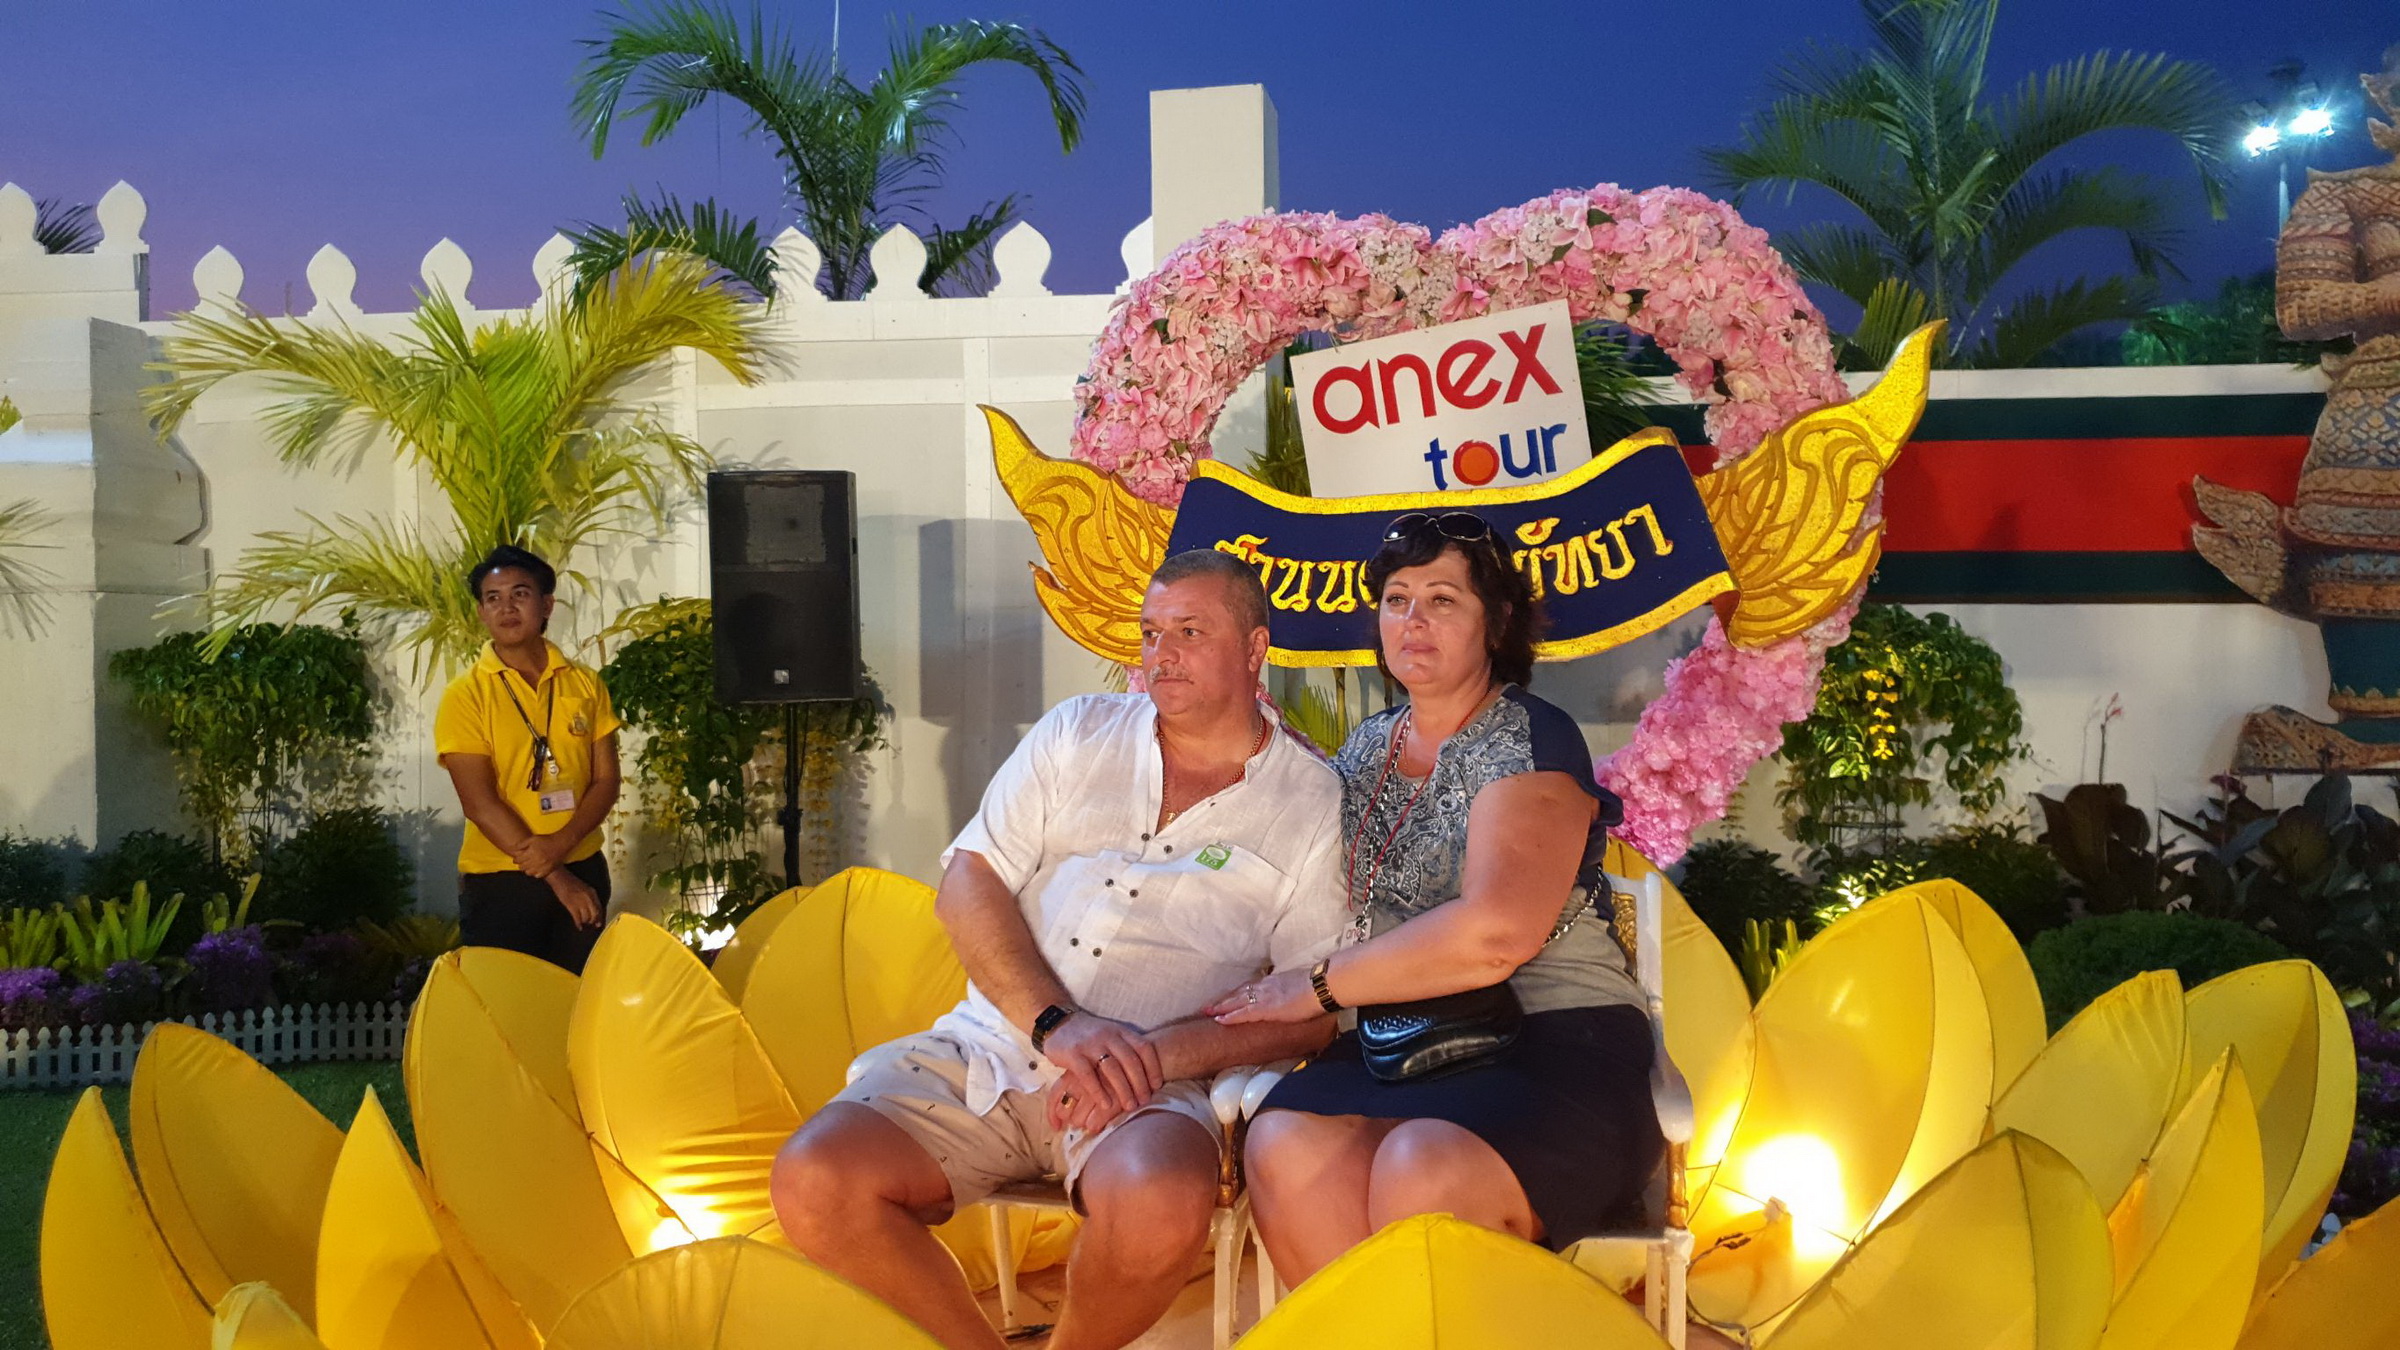 Tourists at a Loy Krathong event on Nov. 11, 2019 at Nong Nooch Tropical Garden in Pattaya.